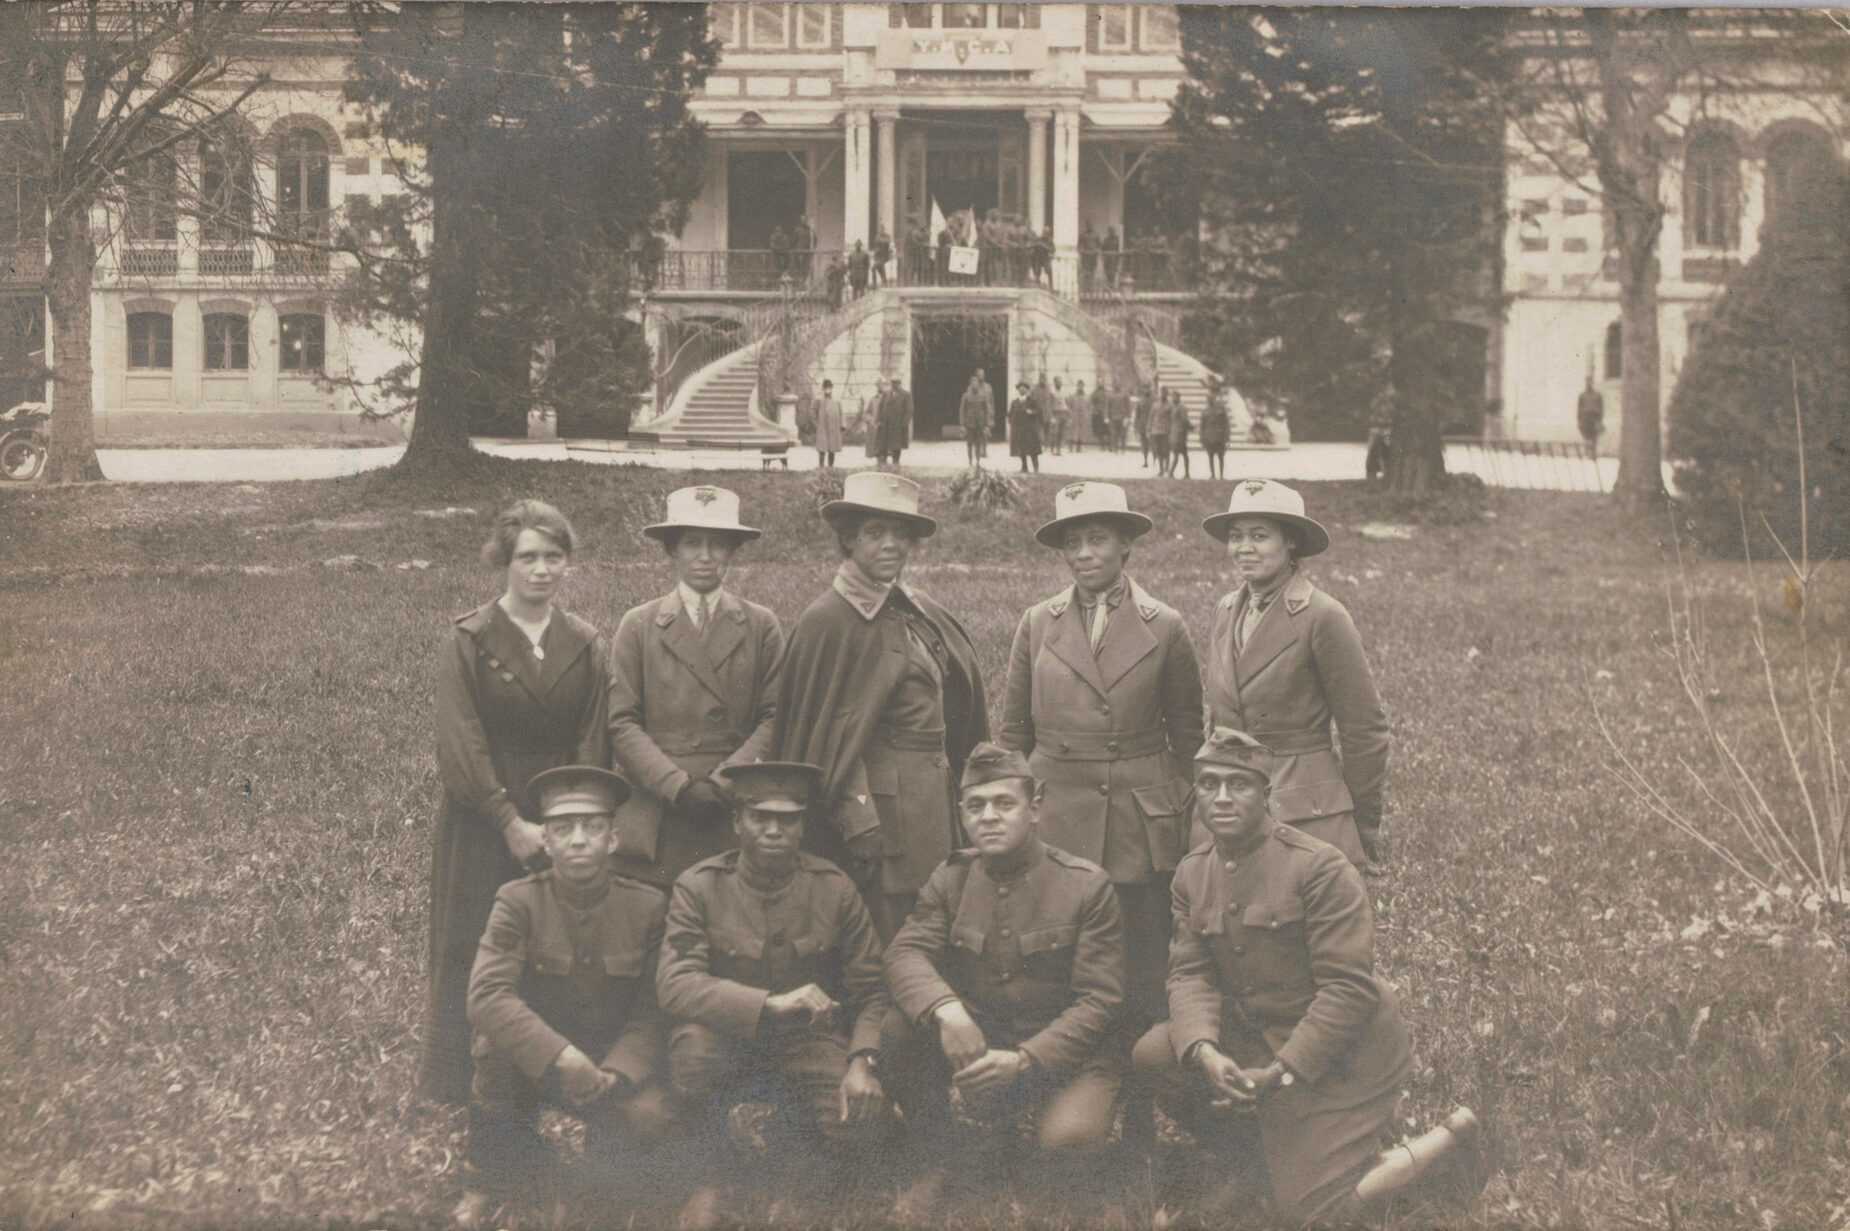 A real photo postcard of a group of military service men and women taken at the YMCA camp near Chambery, France, during World War I. The image depicts five women standing in a row on a lawn, with four men crouched in a row in front of them. Addie Waites Hunton is in the center of the back row; the other women and men are unidentified. In the background is a large building with a double staircased entrance. A temporary sign reading [Y.M.C.A.] has been placed on the portico at the top of the stairs. Other individuals are visible along the top and bottom of the stairs. The verso has printing reading [CARTE POSTALE] with spaces for [Correspondance] and [Adresse] and a horse and horsehead mark for the publisher Guilleminot. The postcard has not been sent, but there is an inscription across the back by hand in brown ink reading [From Sgt. Thomas, who / was on leave at colored, / Y.M.C.A. at Chamberry / France]. There is an inscription by a different hand in graphite above the [Adresse] label reading [(ALFRED JACK THOMAS)].